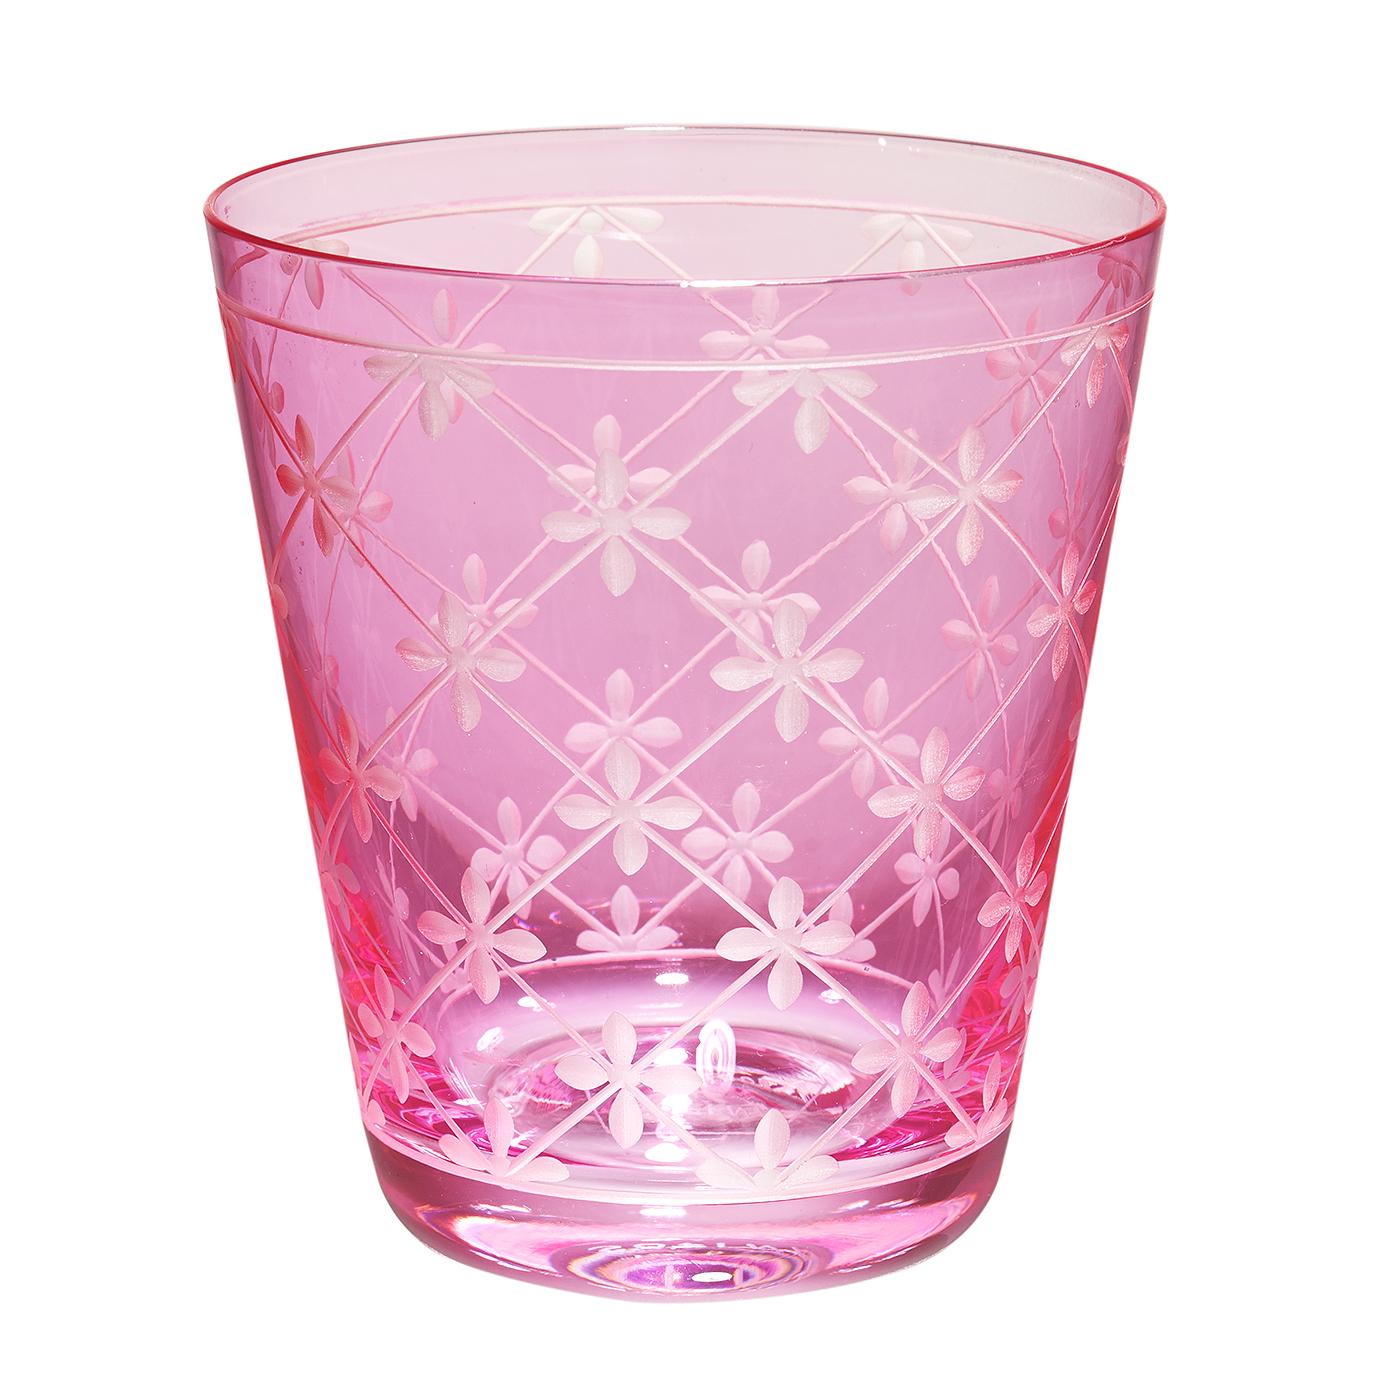 Set of four tumbler hand blown crystal. The glasses are hand-engraved with a modern decor all around. The glasses come in four charming colors yellow, turquoise, blue and rosa. The set can be ordered in different colors or in one color. All glasses